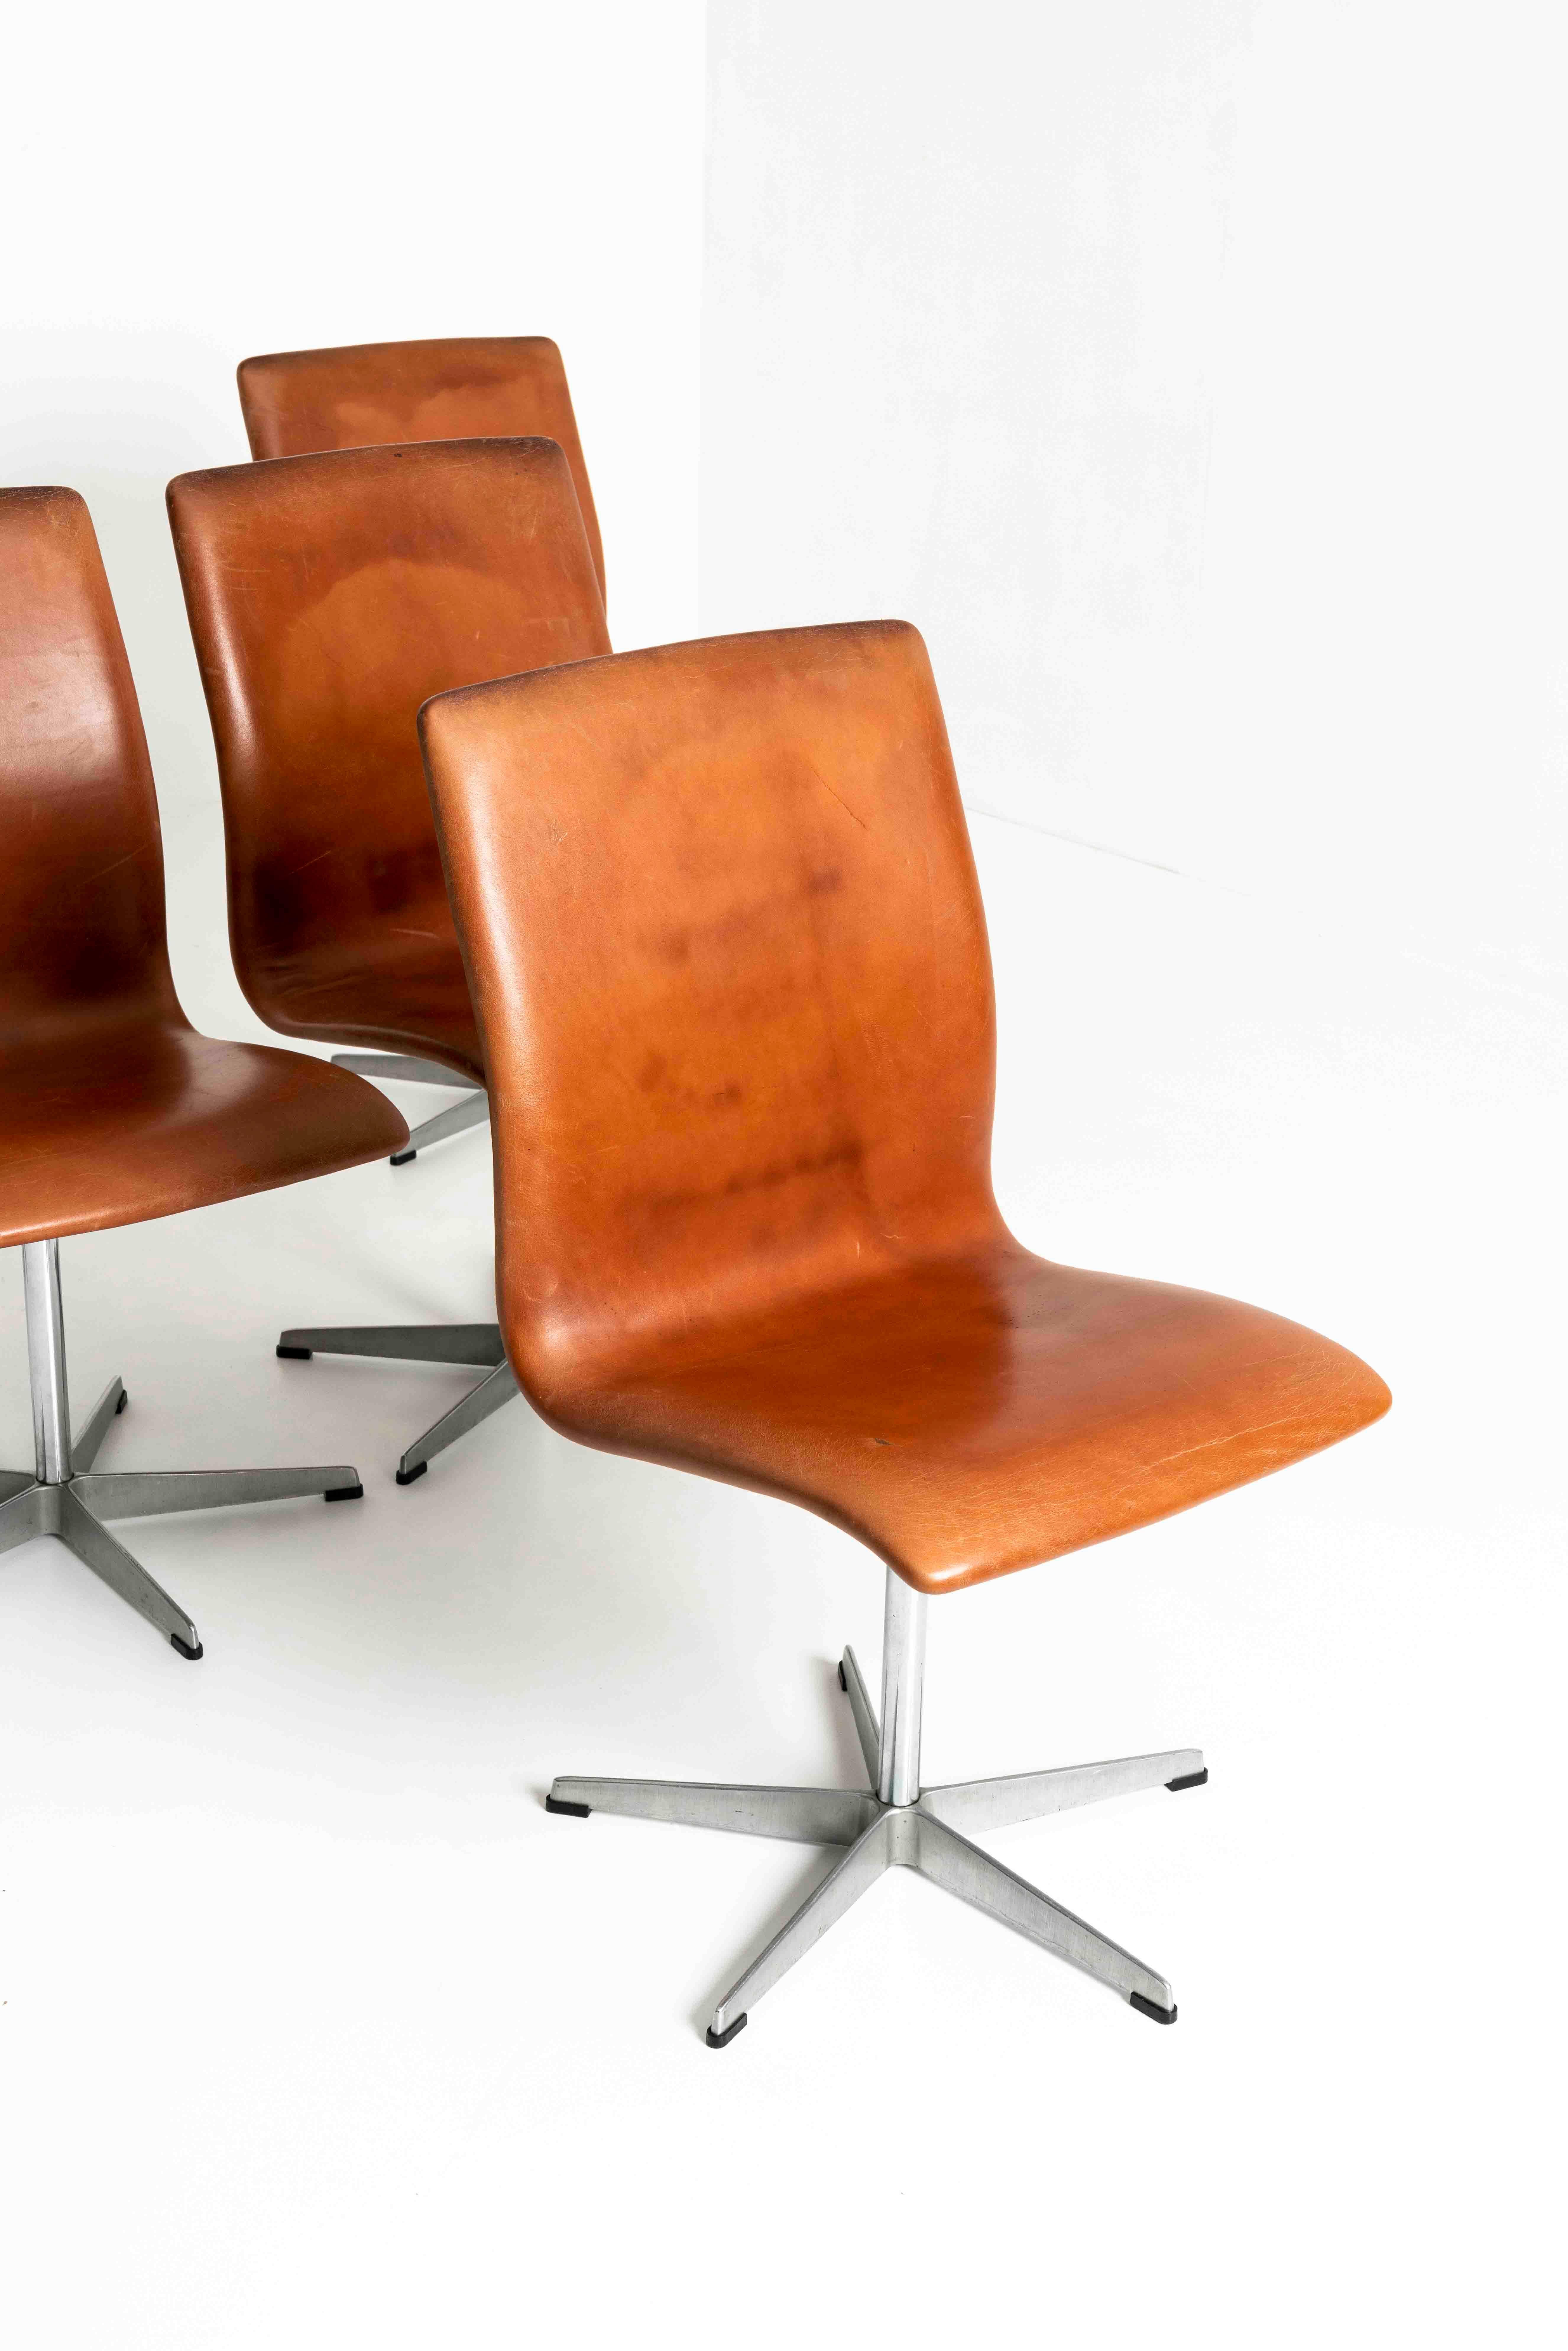 Set of five 'Oxford Chairs' swivel dining chairs with brown leather upholstery and a metal frame. These chairs, with model 3171, are designed in 1965 and executed at a later date by Fritz Hansen. The chairs have a nice patina and are clearly marked.